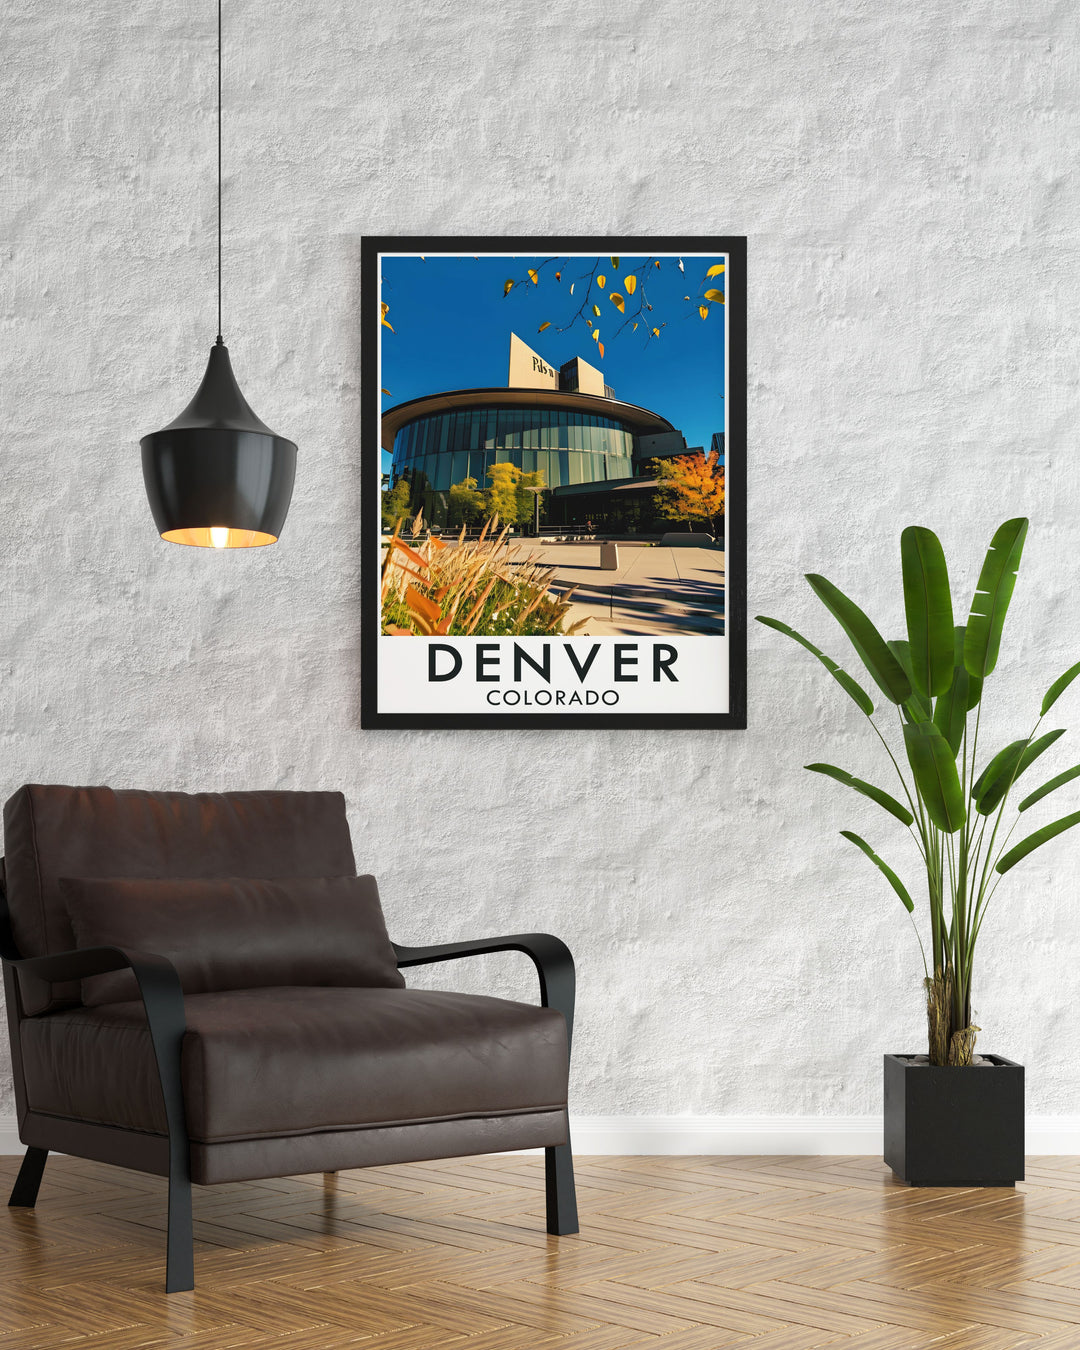 This Denver art print features the citys iconic skyline and rich urban landscape, making it a perfect piece for lovers of cityscapes and travel art enthusiasts.